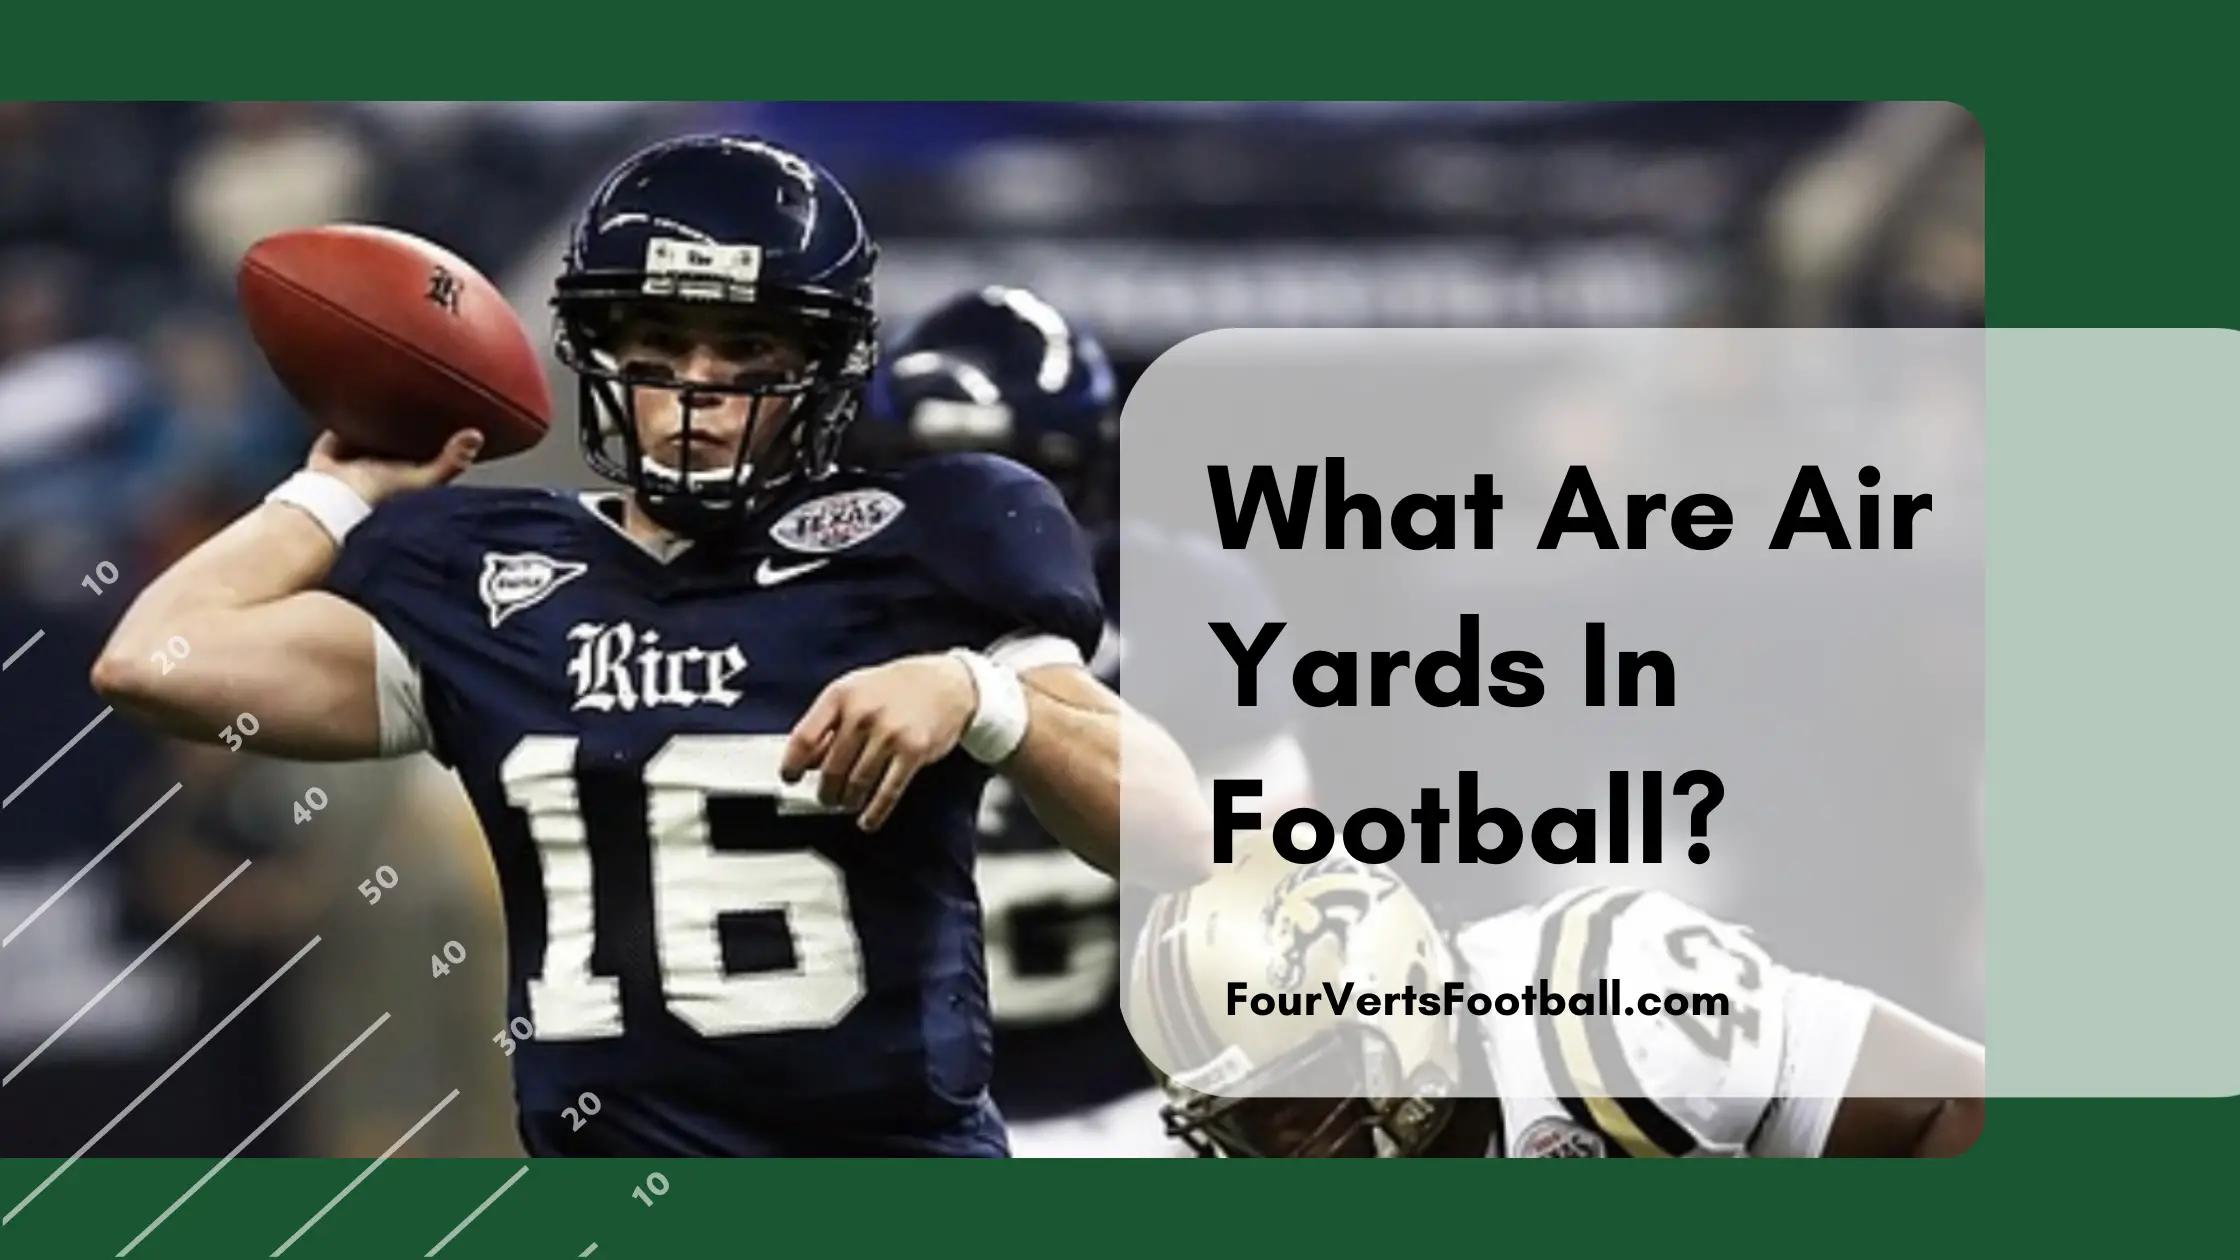 What Are Air Yards In Football?